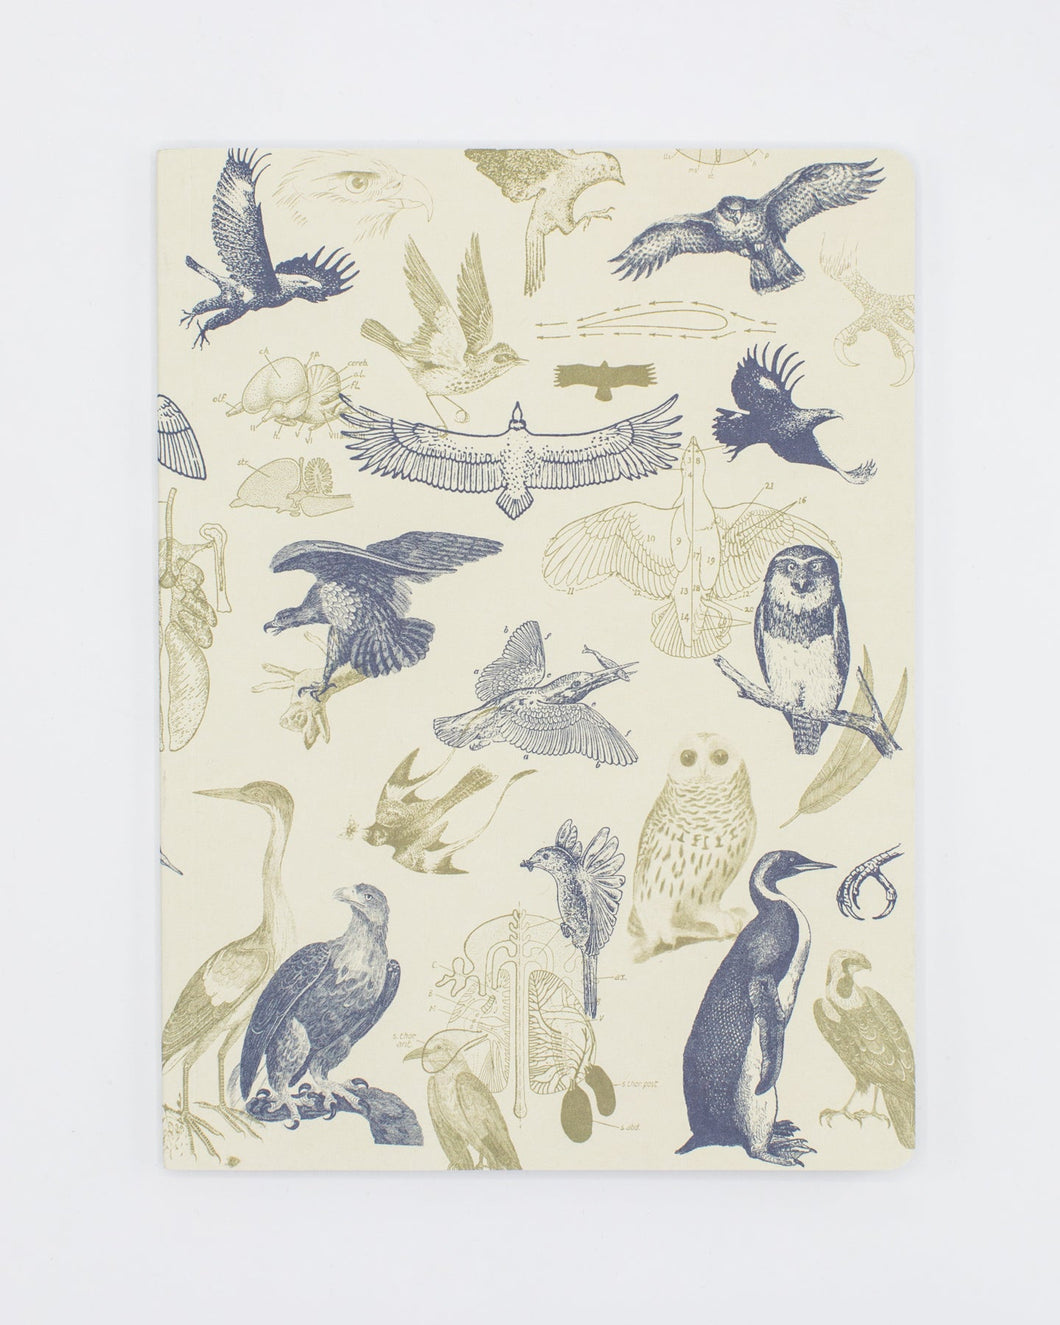 Hunt down your conclusions or let your imagination soar in this cream-colored Birds of Prey notebook.